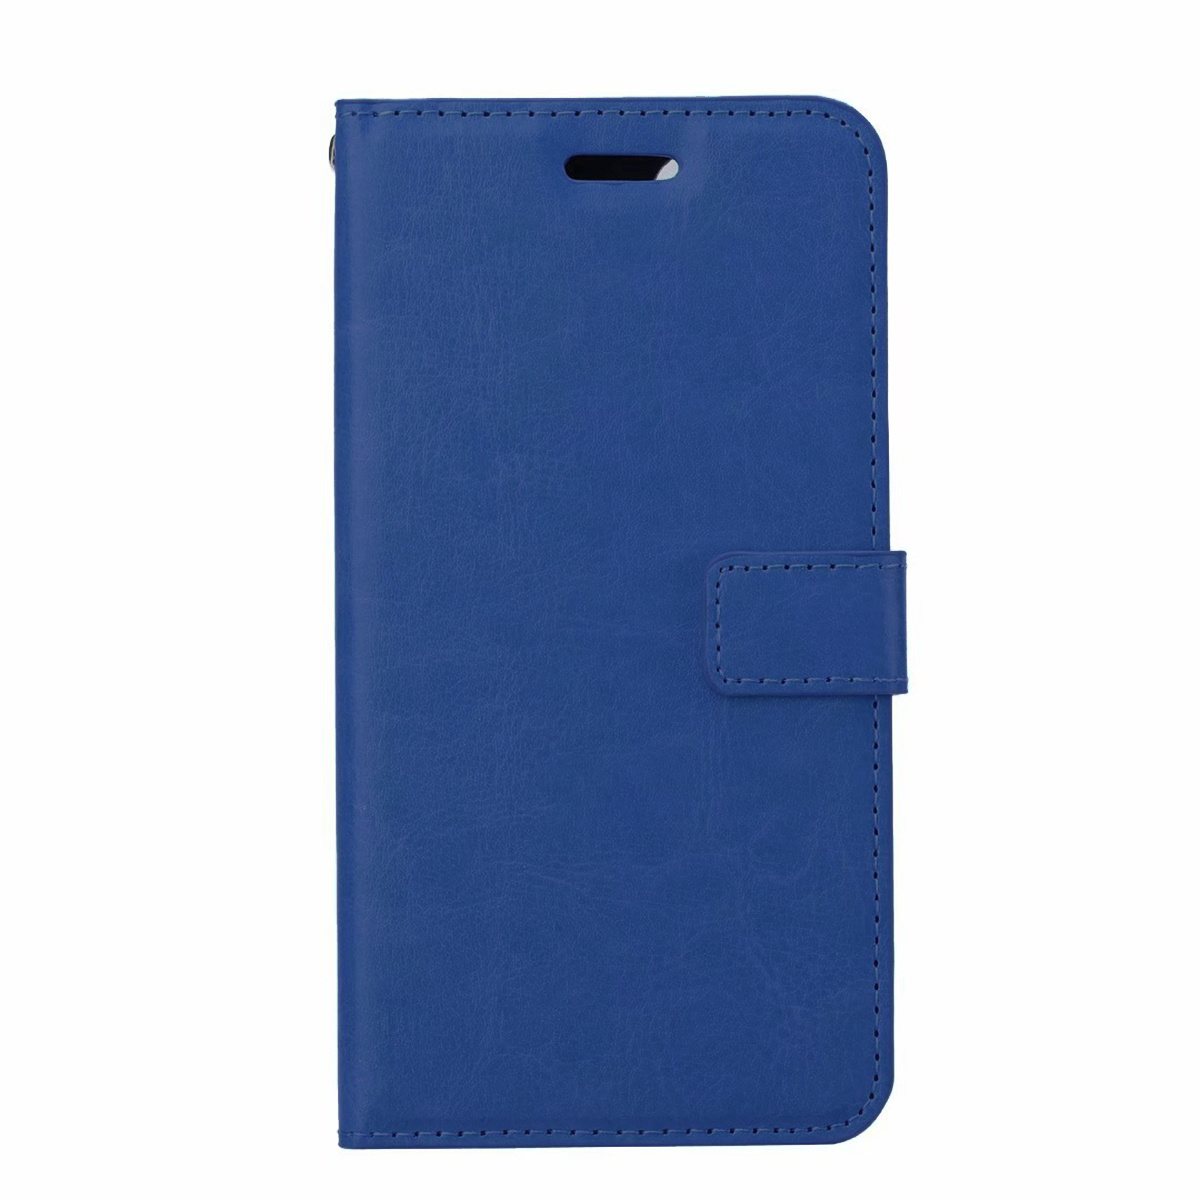 Nomfy Hoes voor iPhone 11 Pro Hoes Bookcase Flipcase Book Cover - Hoes voor iPhone 11 Pro Hoesje Book Case - Donker Blauw